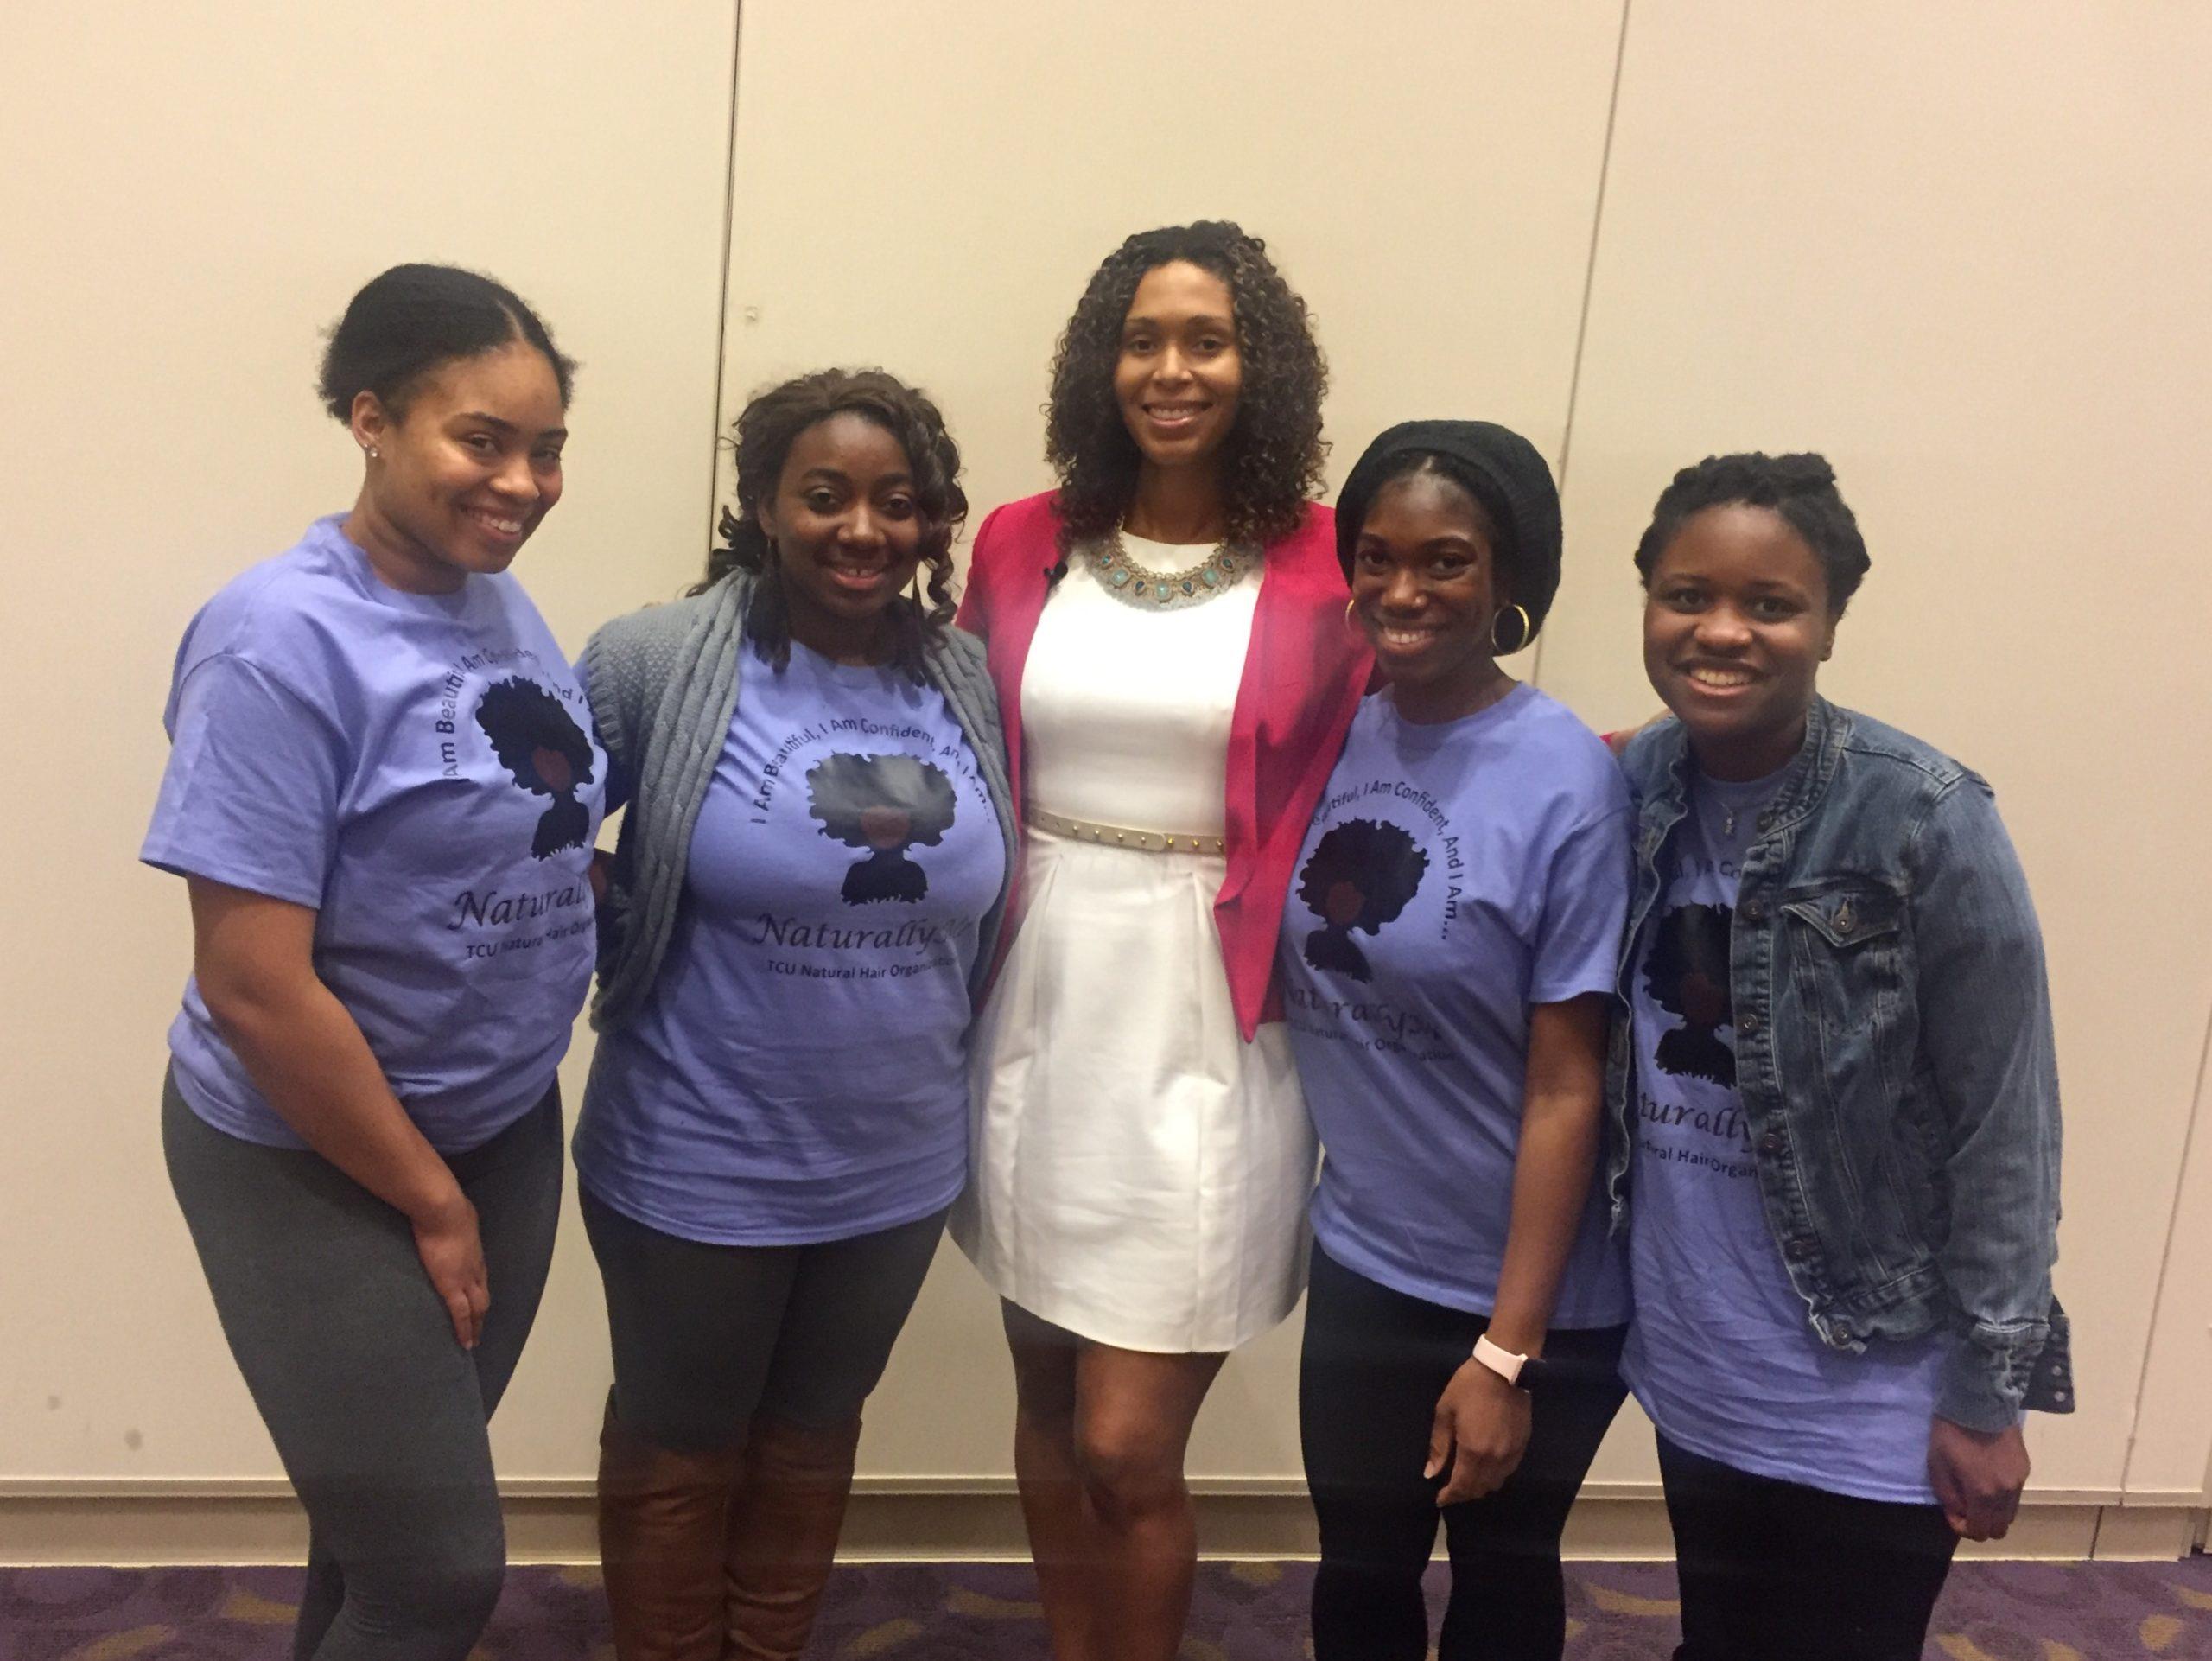 Danielle Kemp, founder of DamiSays and TheCurlyDiva with NaturallyMi members: Elise Shropshire, Courtney Manning, Tyler Traylor, and Latoinette Wright. (Photo: Brandon Kitchin)